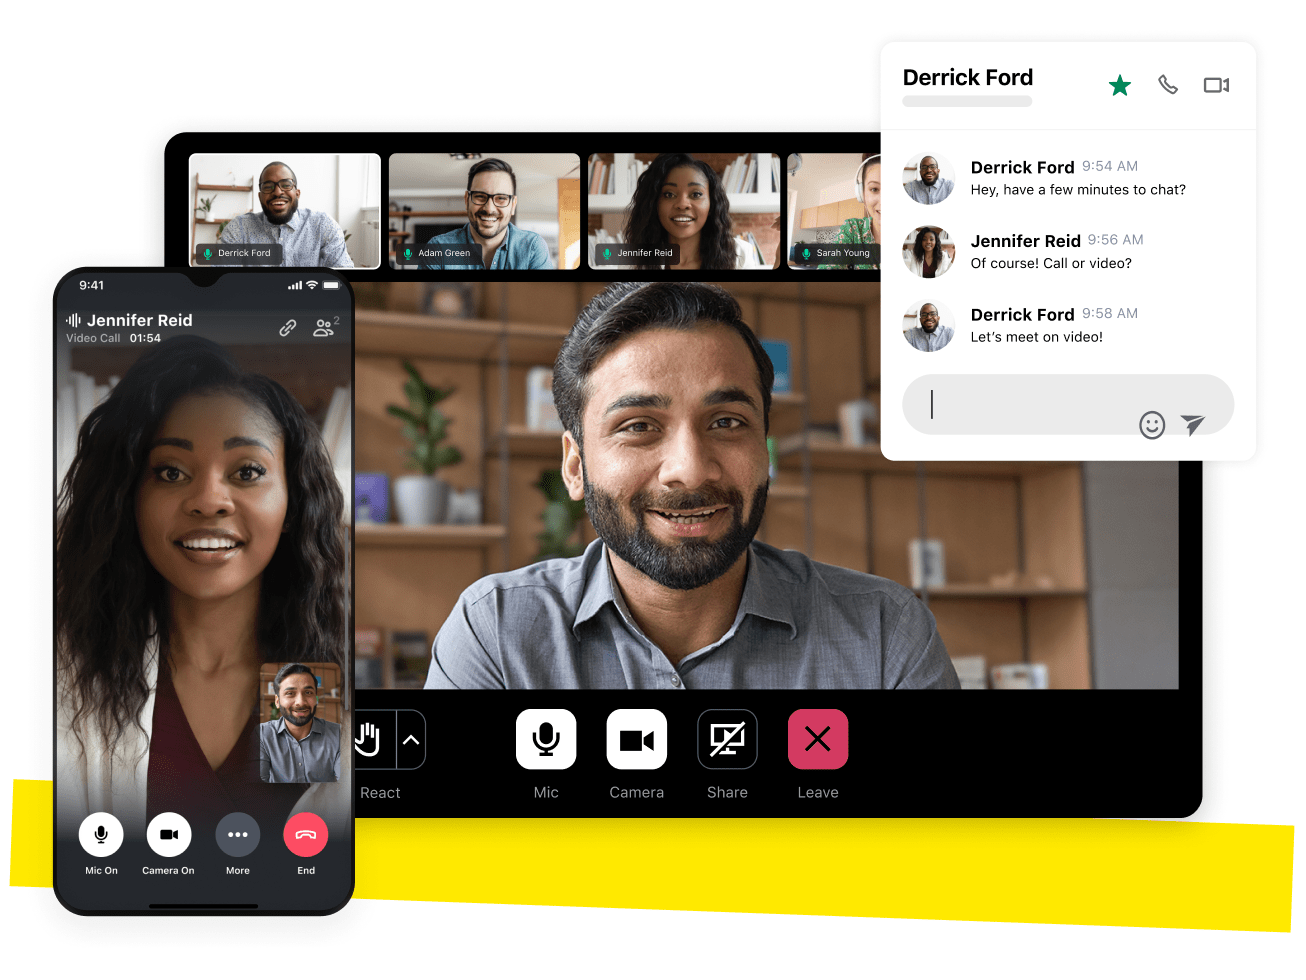 Phone, meetings, and messaging on any device GoTo Connect makes it easy for your team to collaborate from anywhere. Make calls, host meetings, or send messages and texts from any device. You can even join from your browser – no downloads needed. 